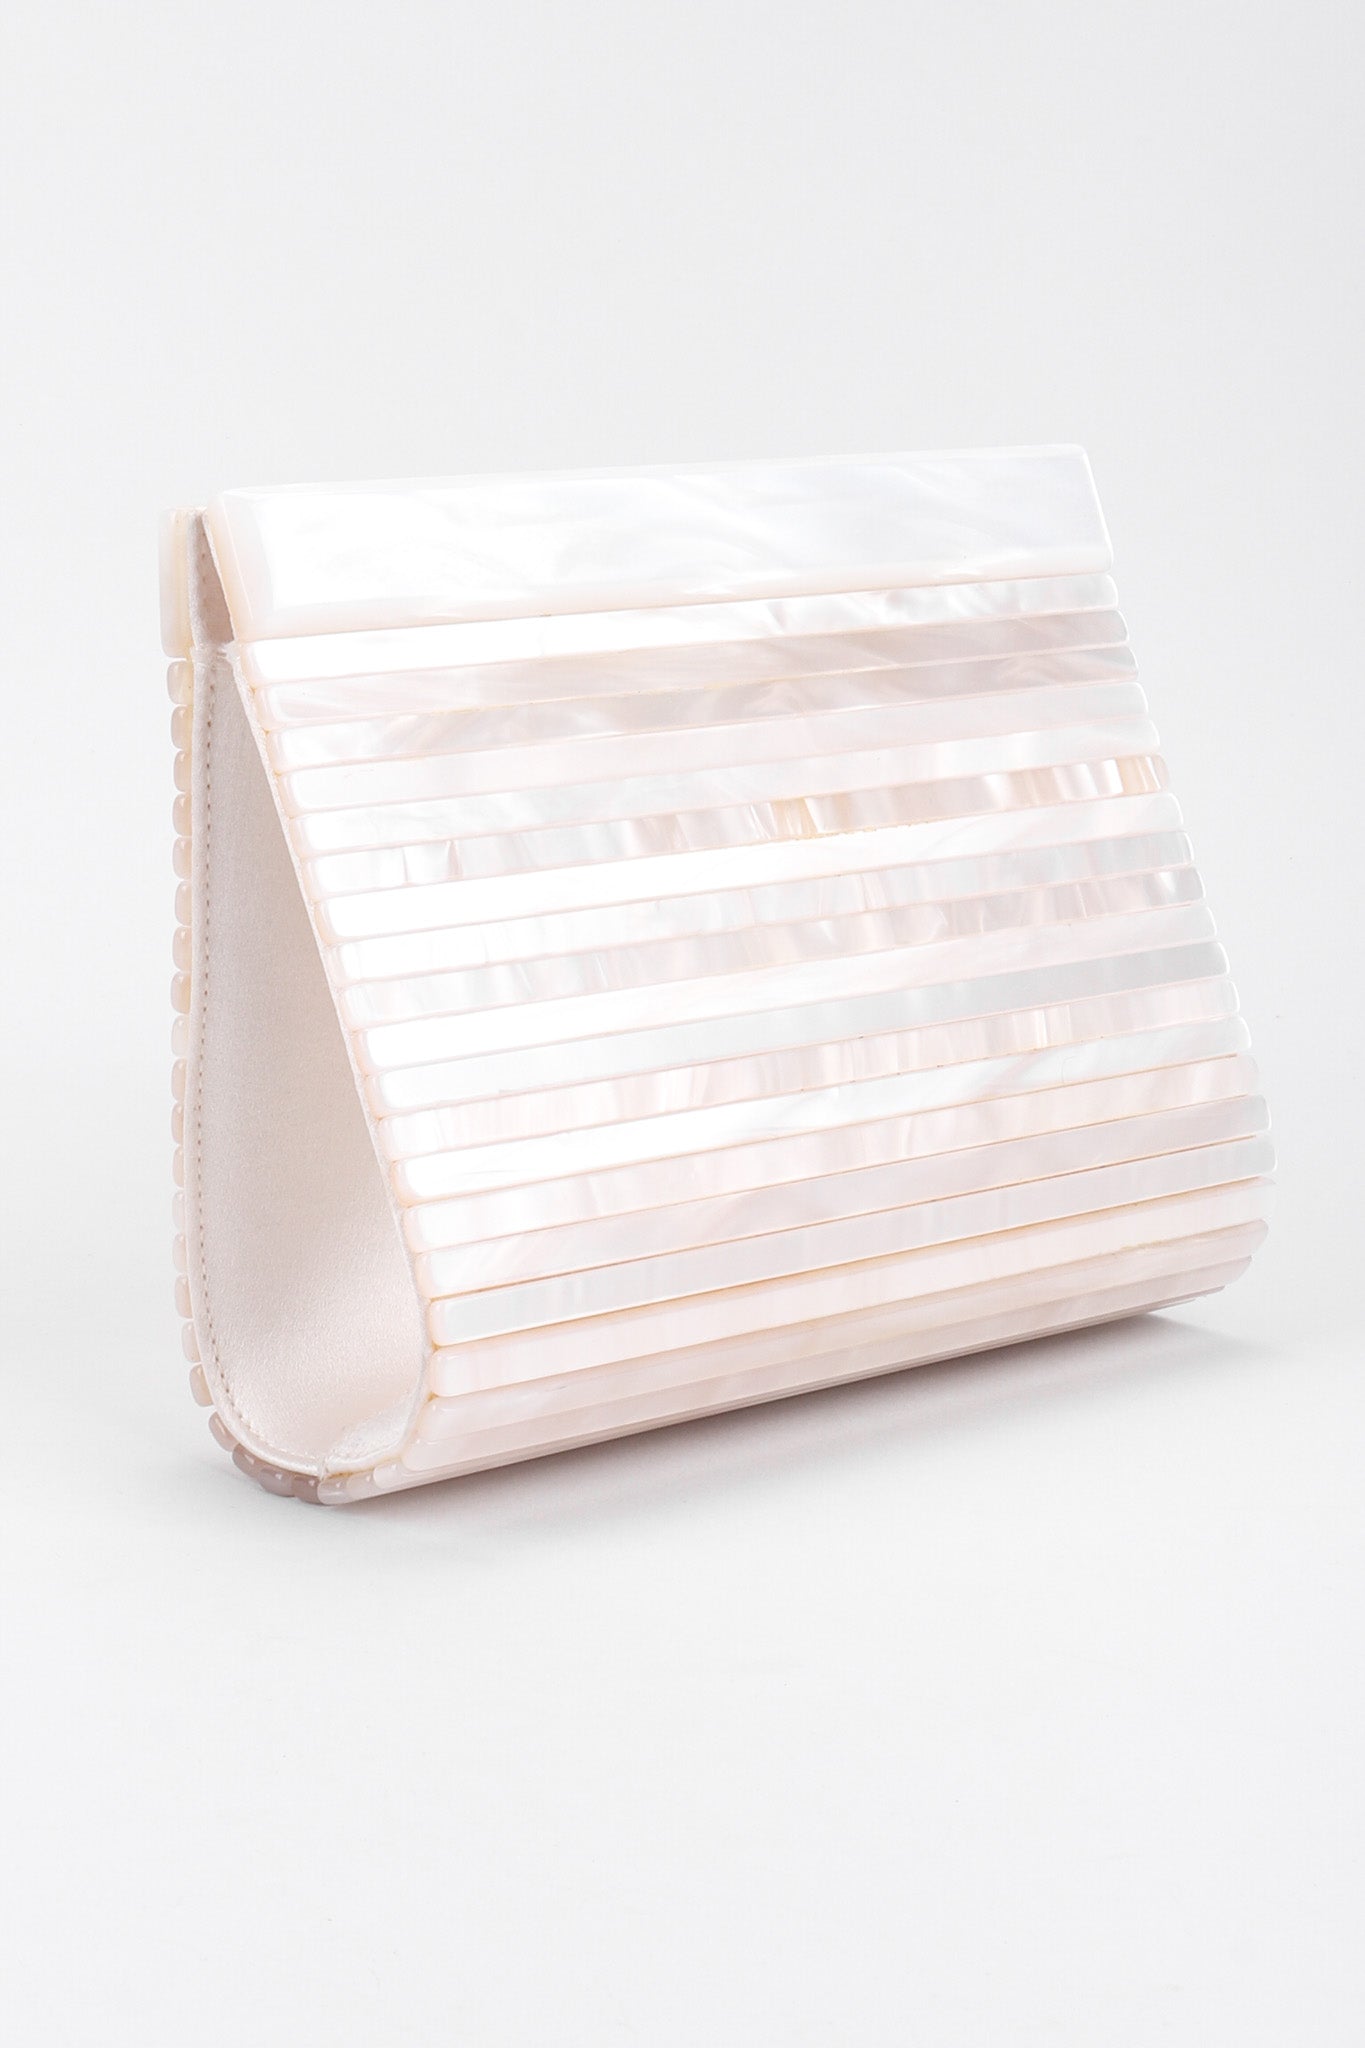 Recess Los Angeles Vintage St John Lucite Mother-of-Pearl Bridal Winter White Satin Clutch